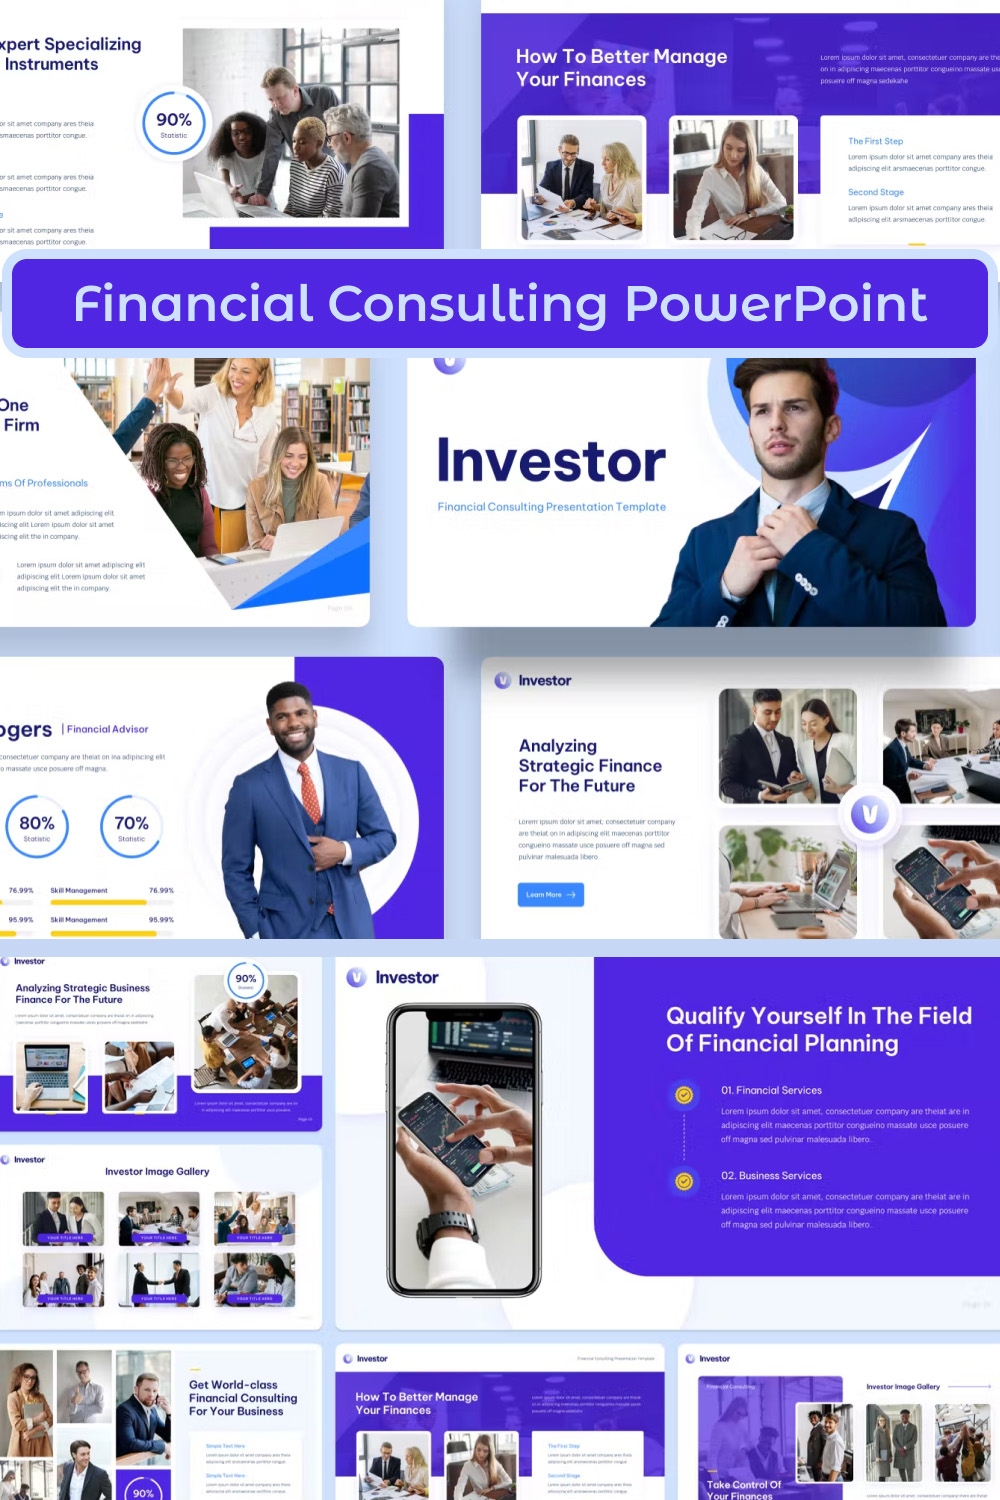 Investor financial consulting powerpoint of pinterest.